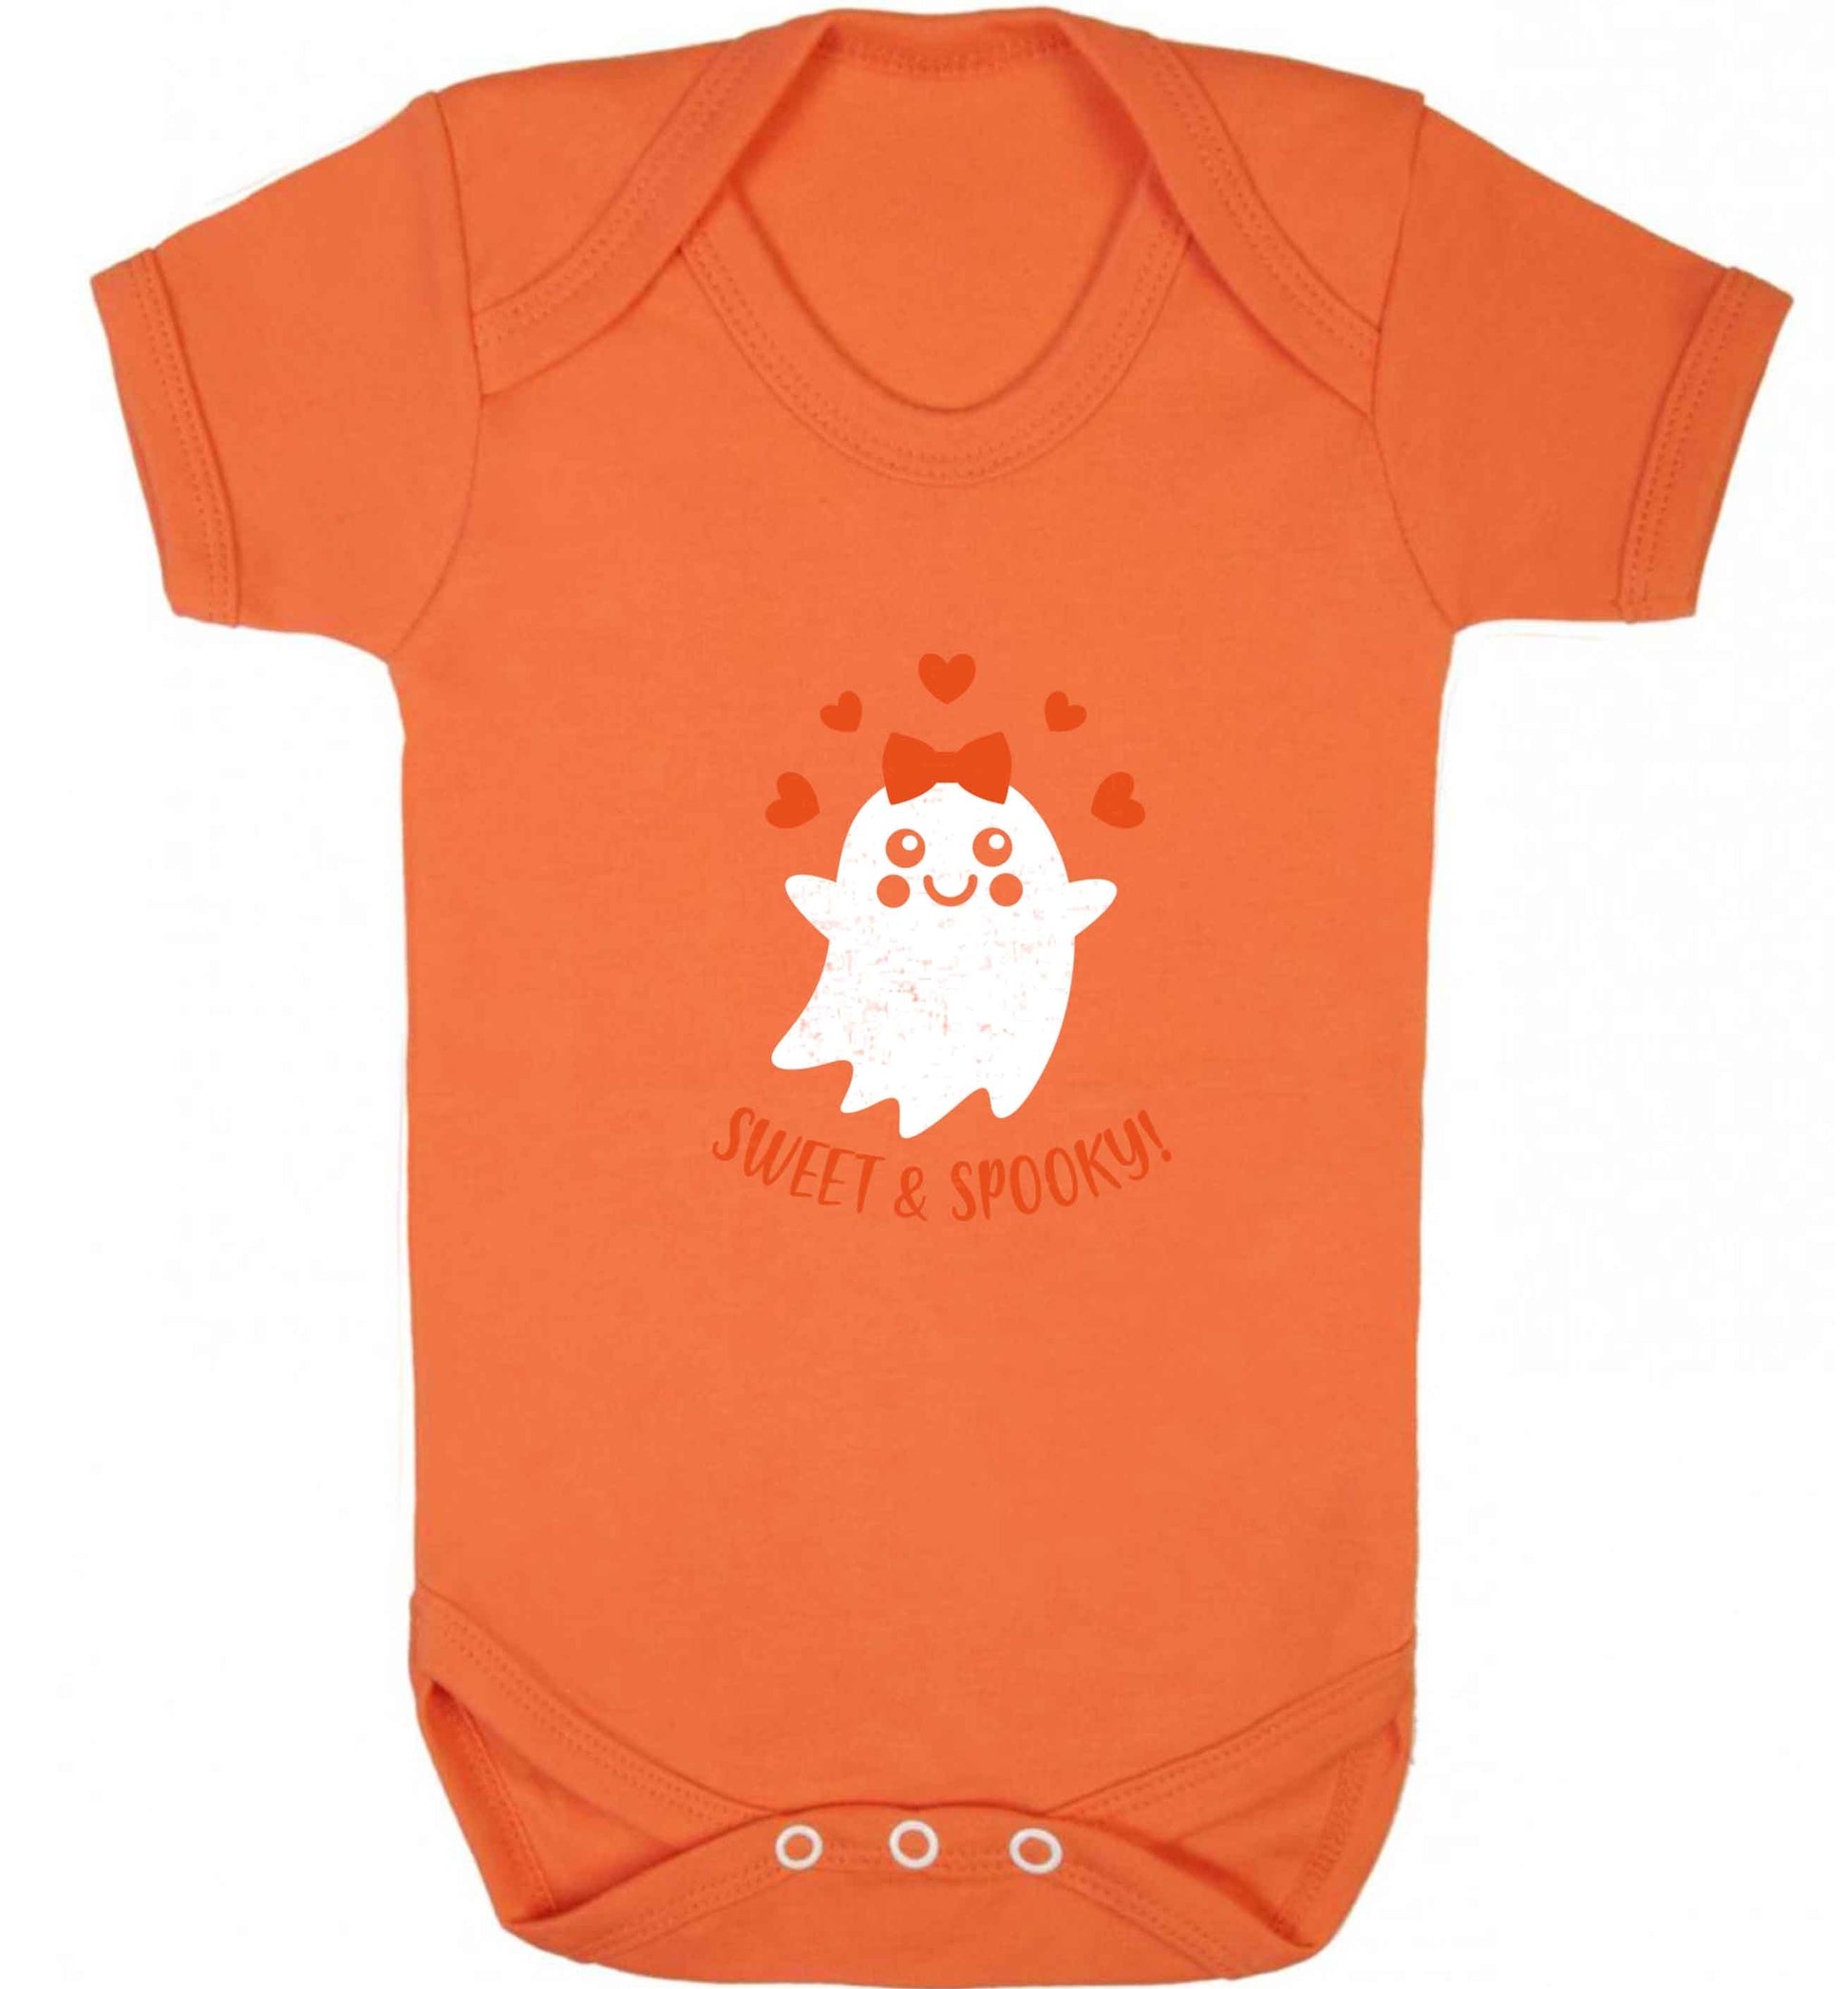 Sweet and spooky baby vest orange 18-24 months